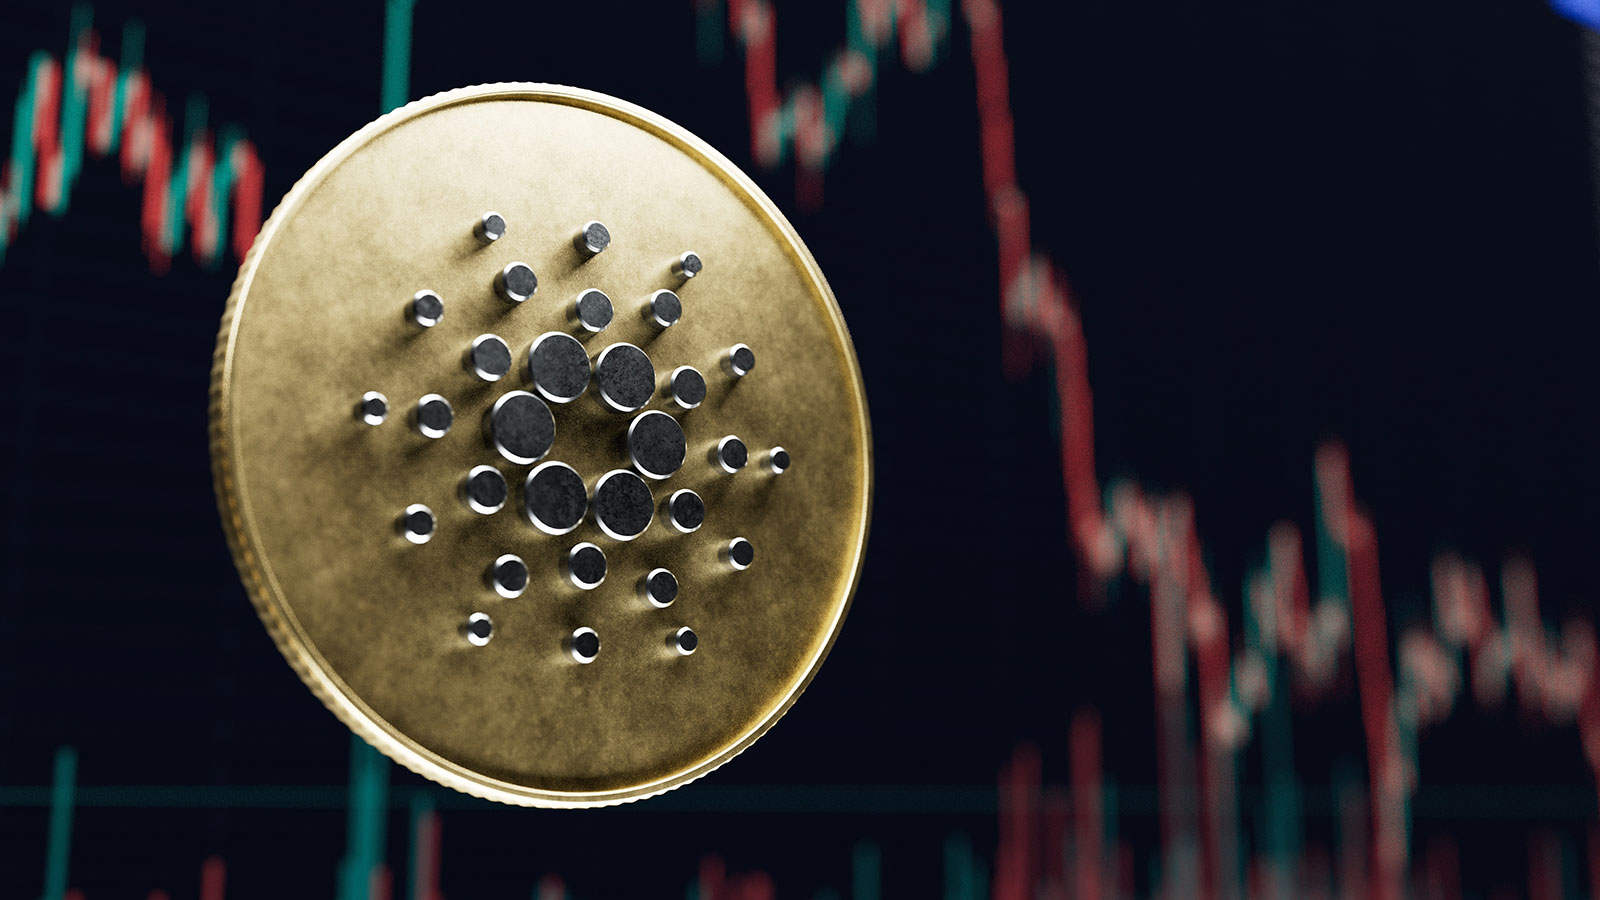 Cardano (ADA) Price at Risk of 30% Drop. Here's Why